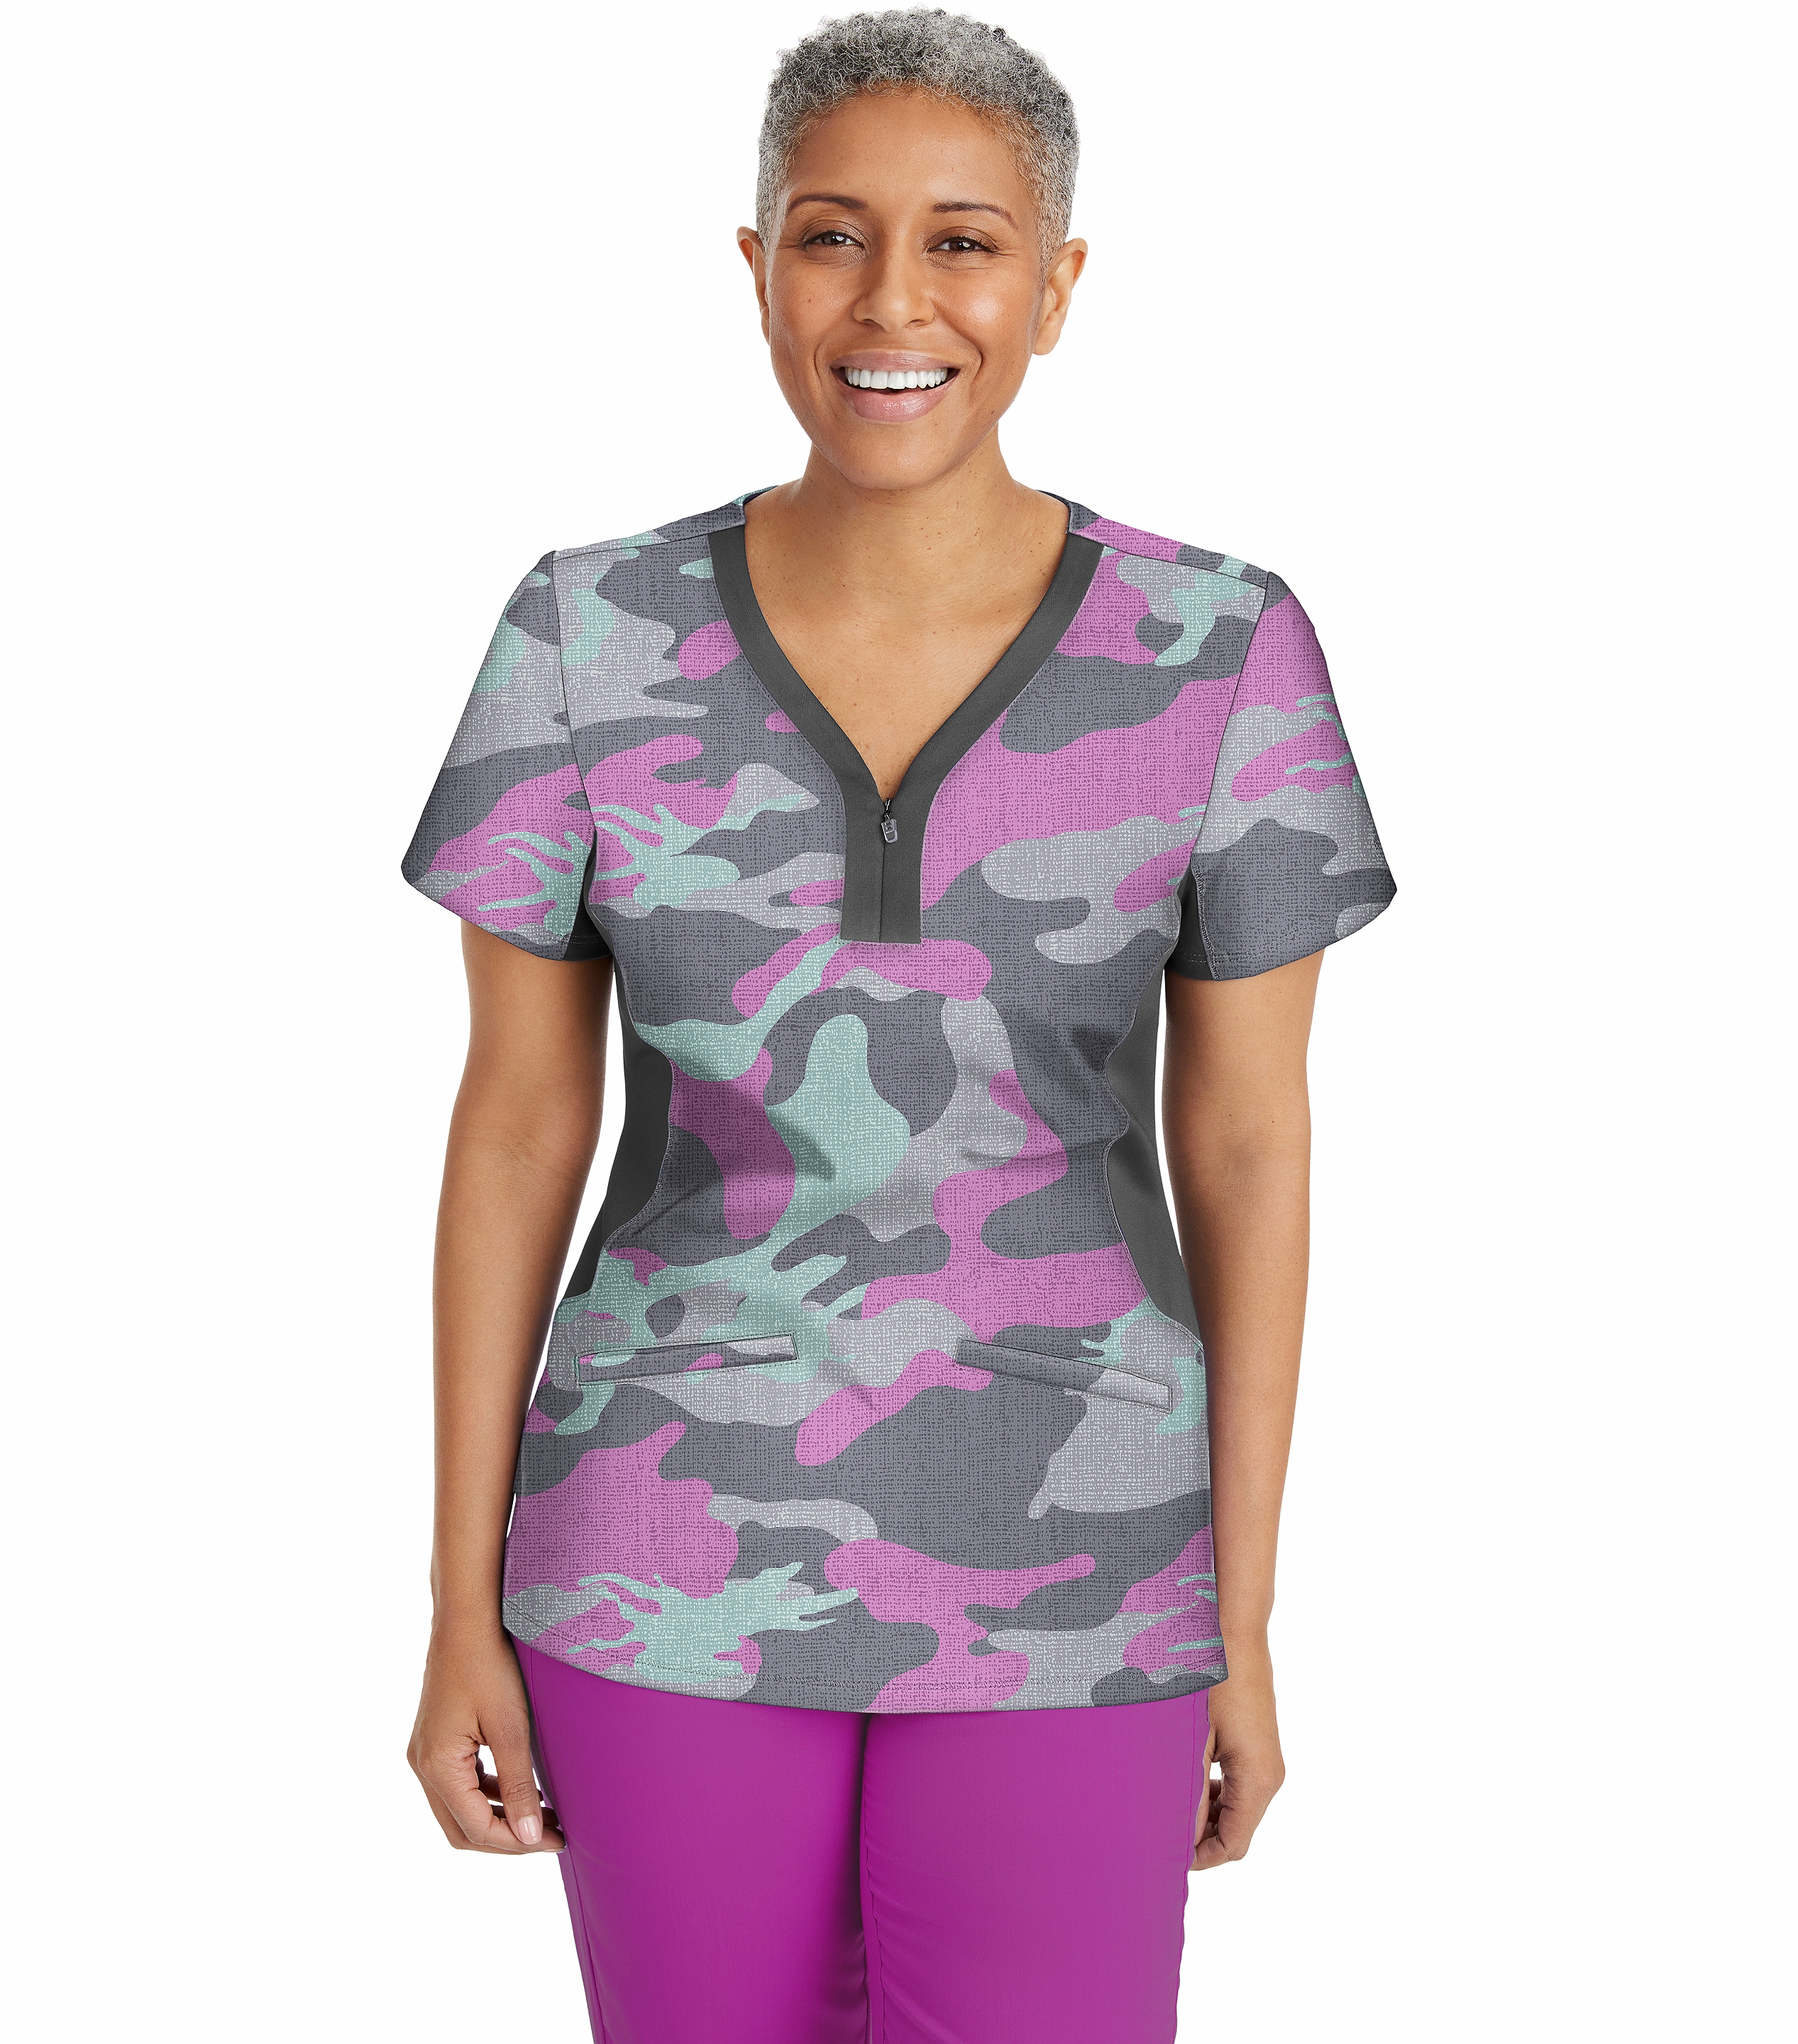 Healing Hands Purple Label Jessi Printed Scrub Top 2270 Cam Medical Scrubs Collection